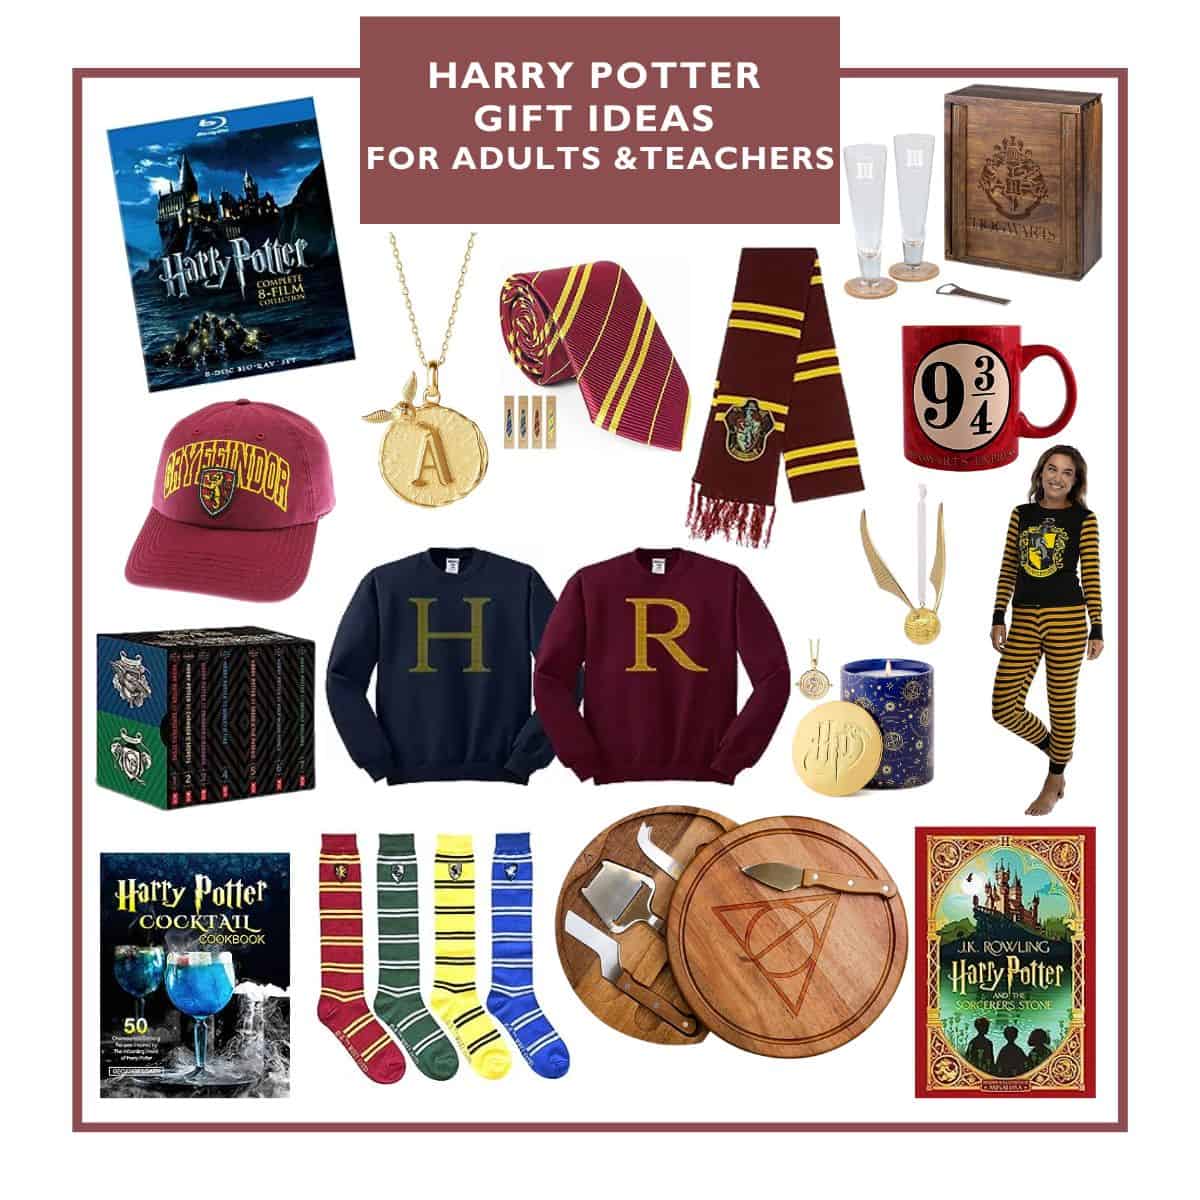 75 Perfect Harry Potter Gift Ideas for Adults & Teachers